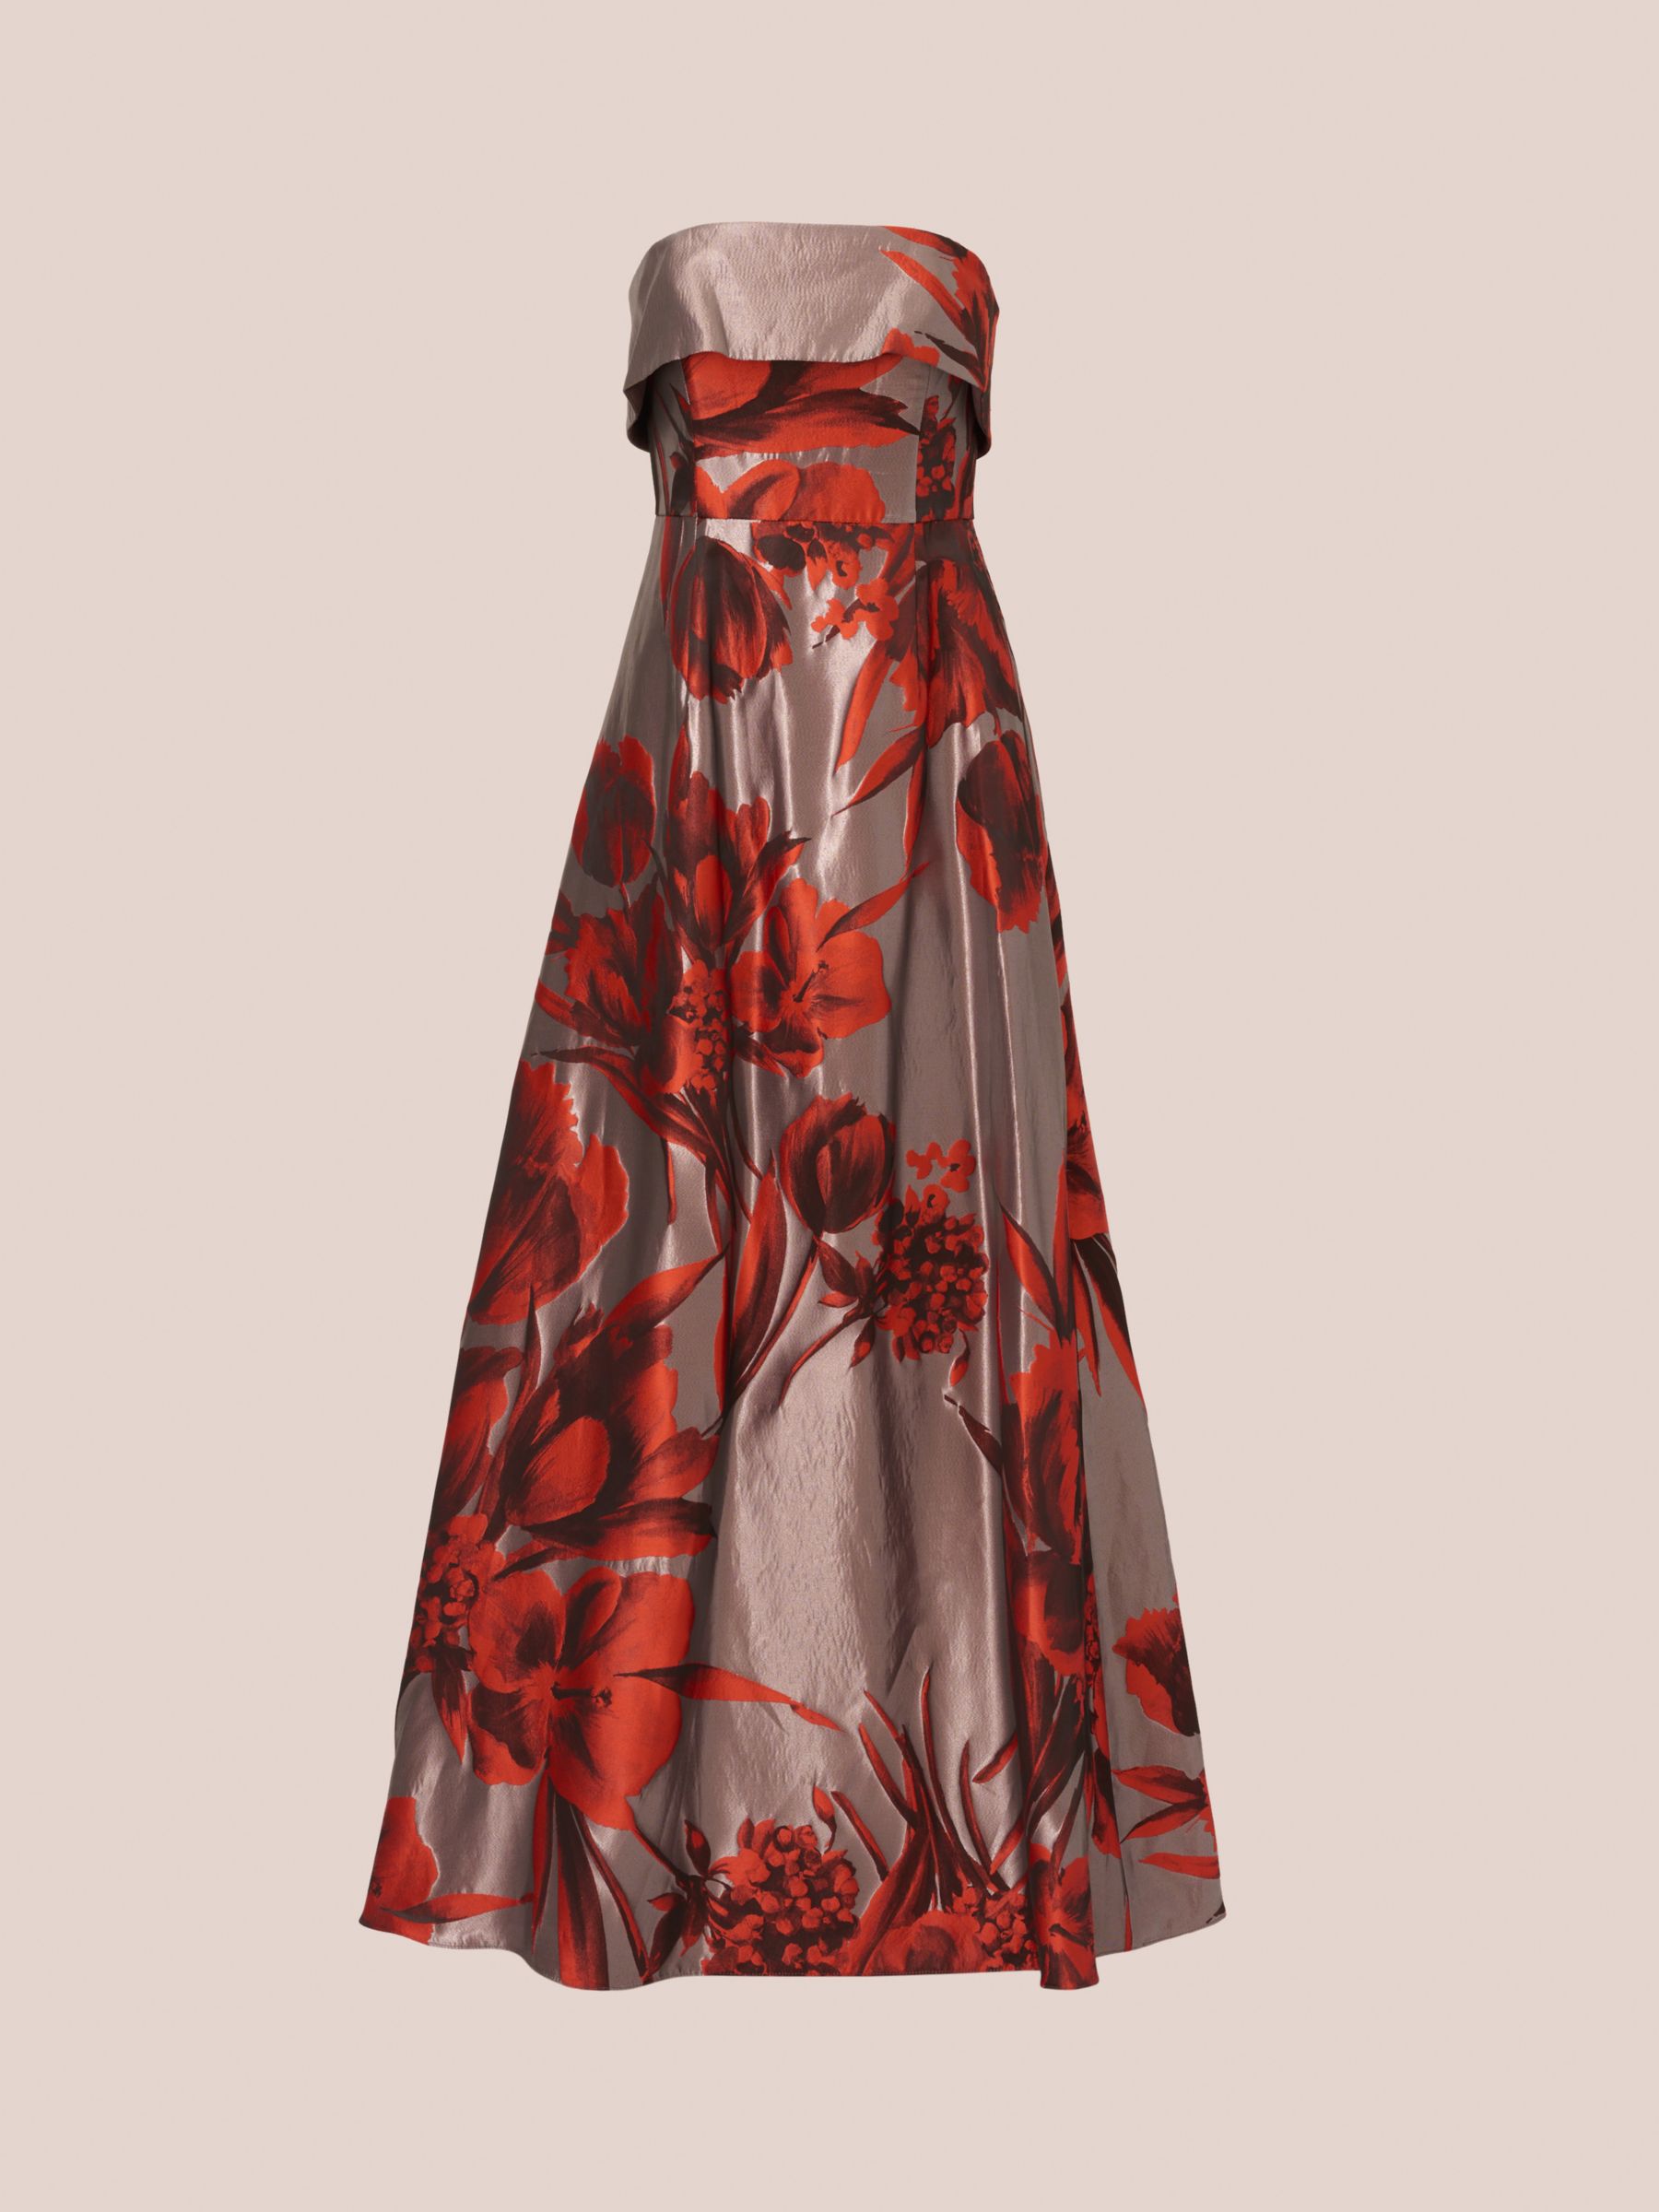 Buy Aidan Mattox by Adrianna Papell Strapless Floral Jacquard Maxi Dress, Rust/Multi Online at johnlewis.com